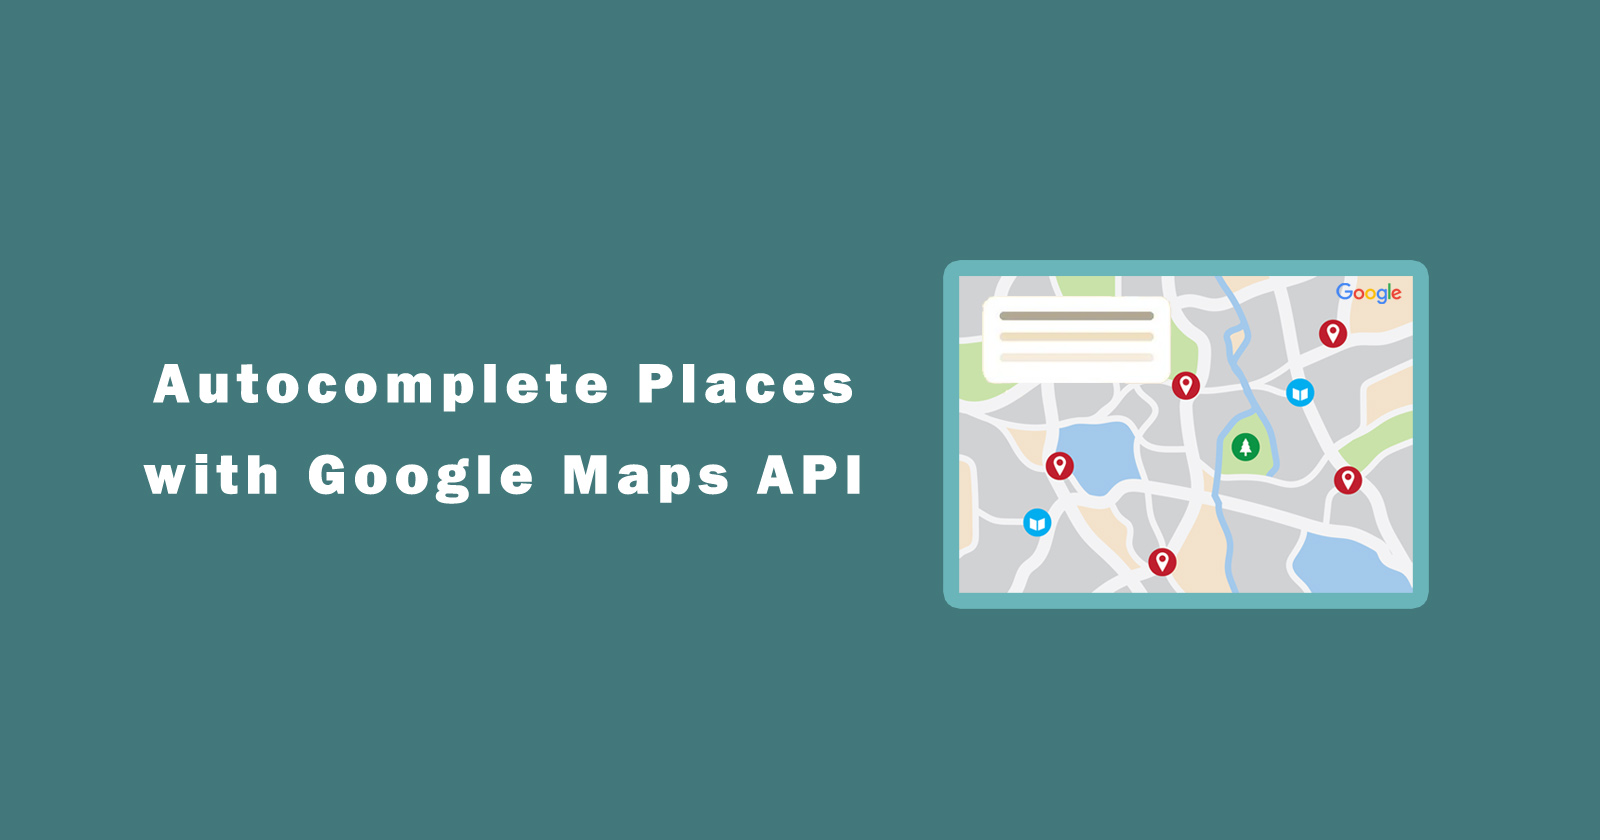 How to Use Google Maps JavaScript API for Autocomplete Places?